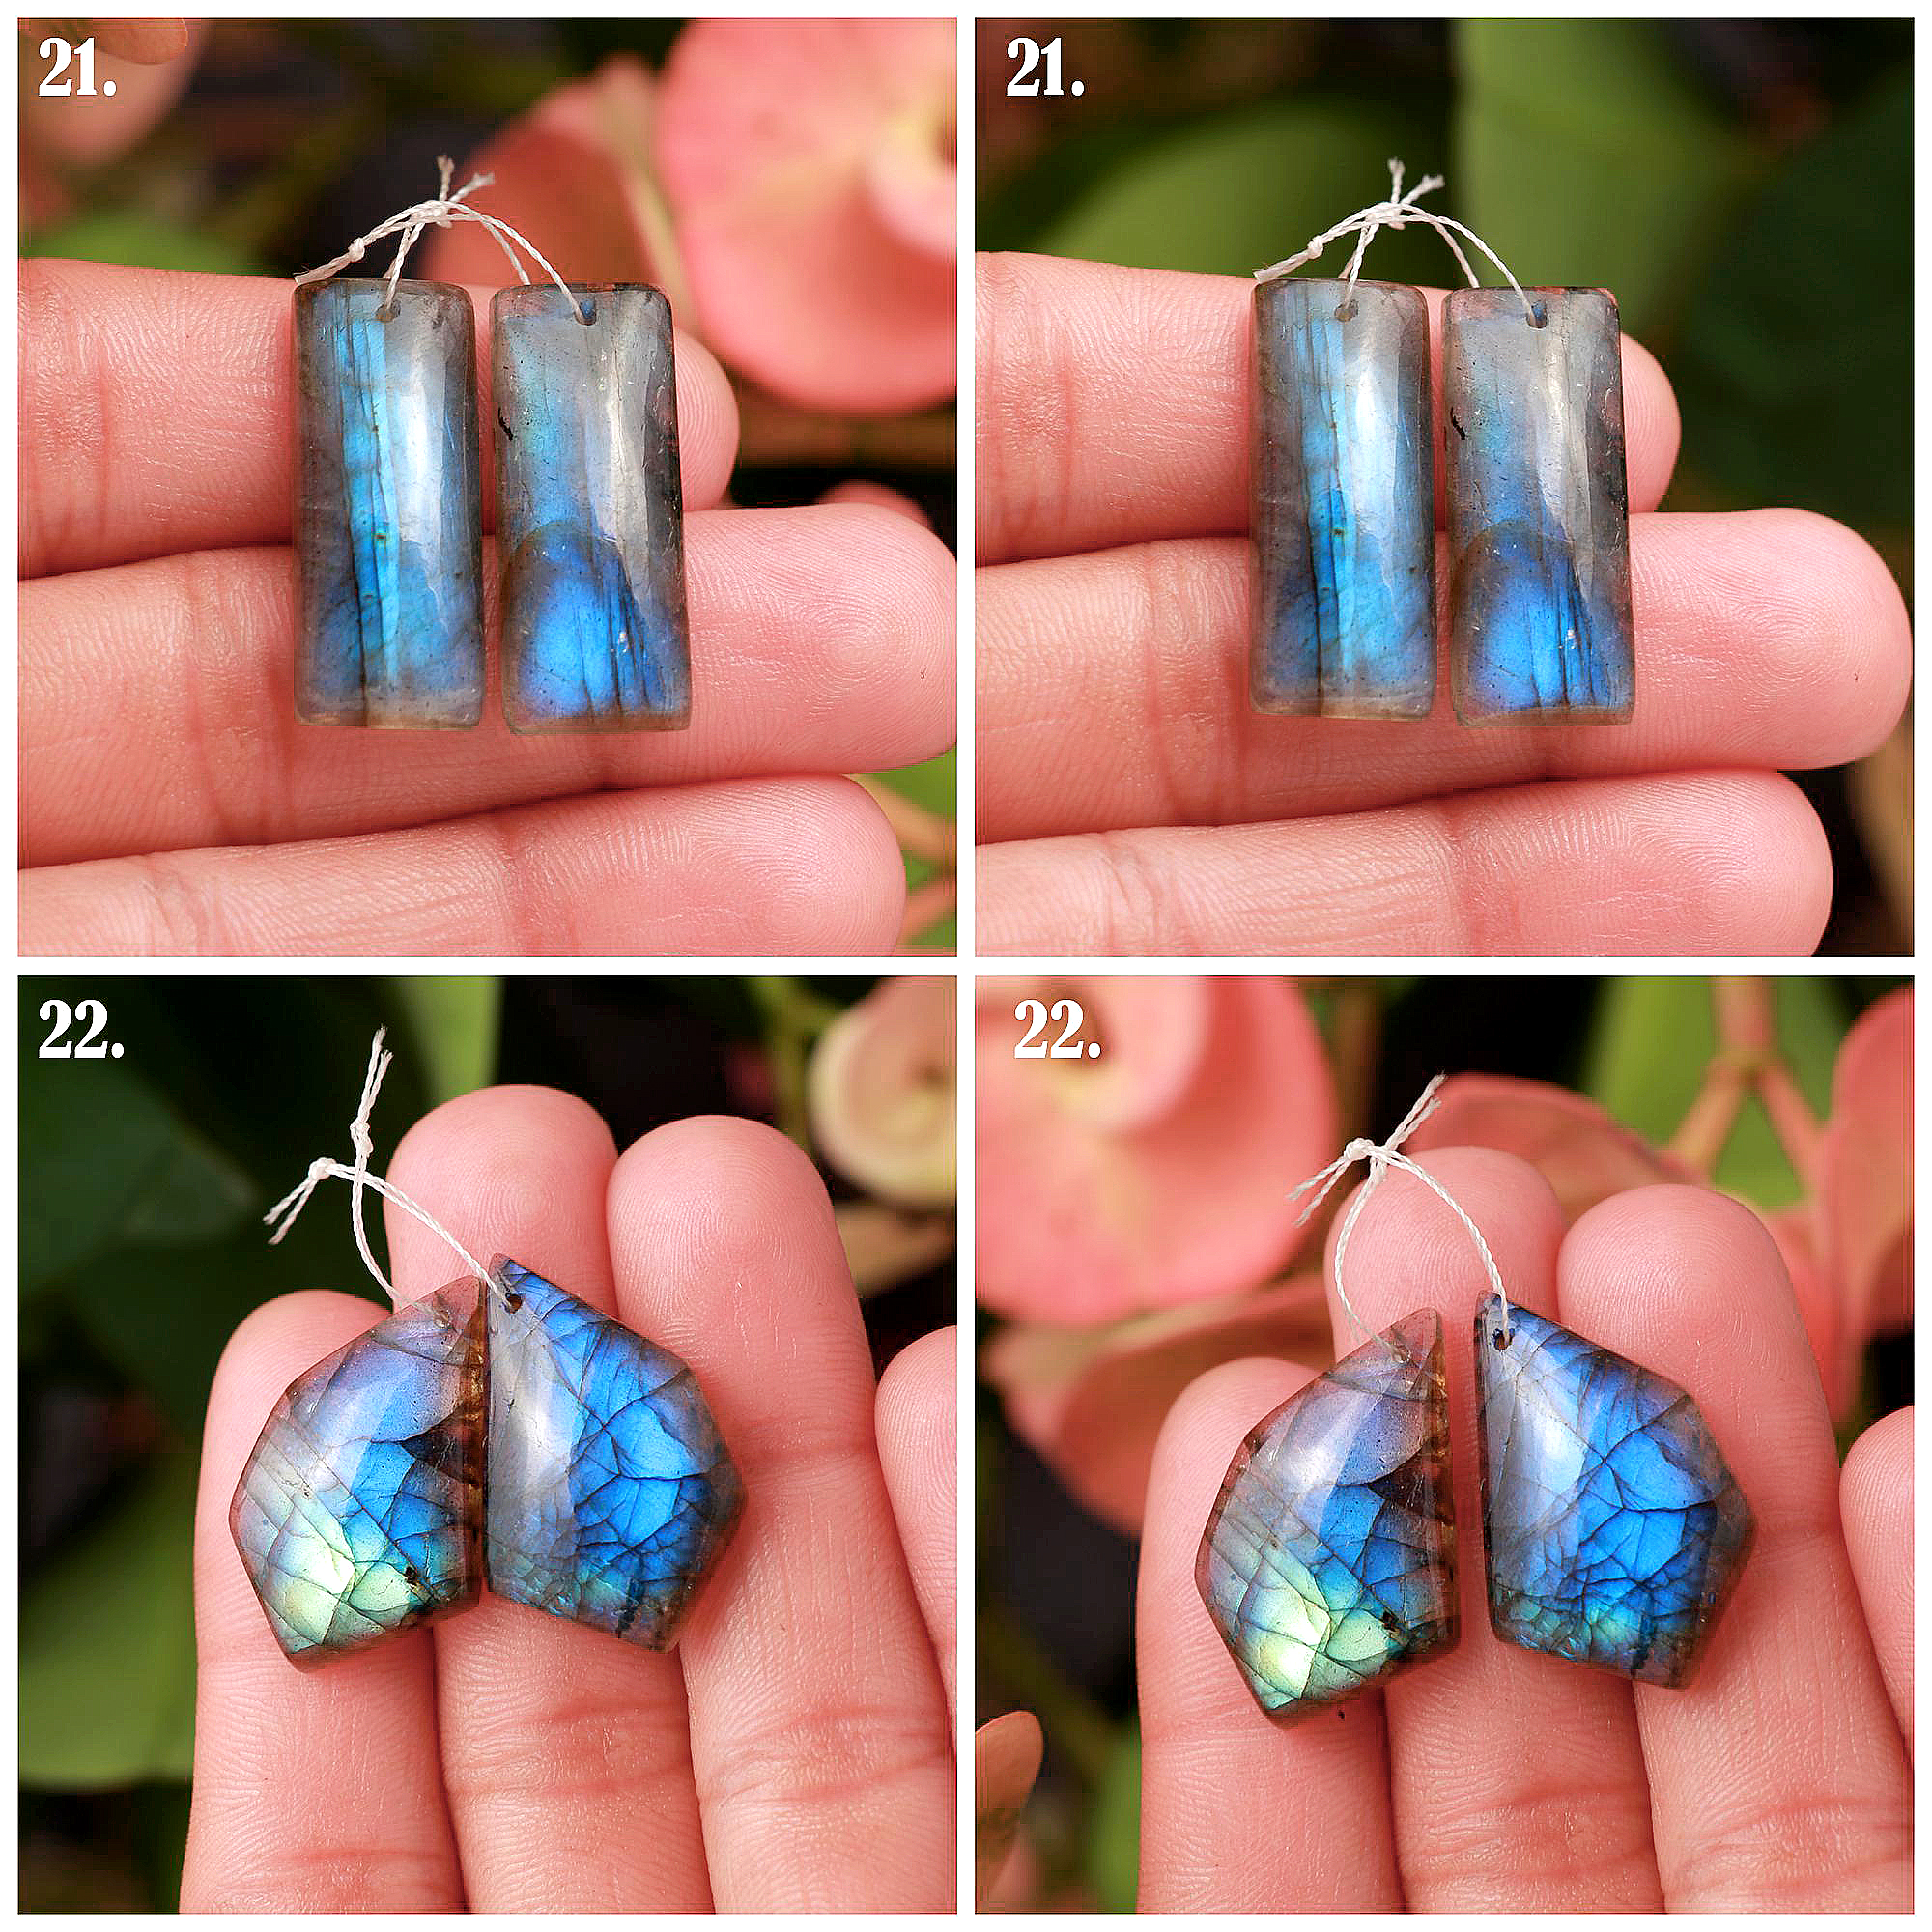 Natural Labradorite Front To Back Drilled Earring Pair Loose Gemstone For Jewelry